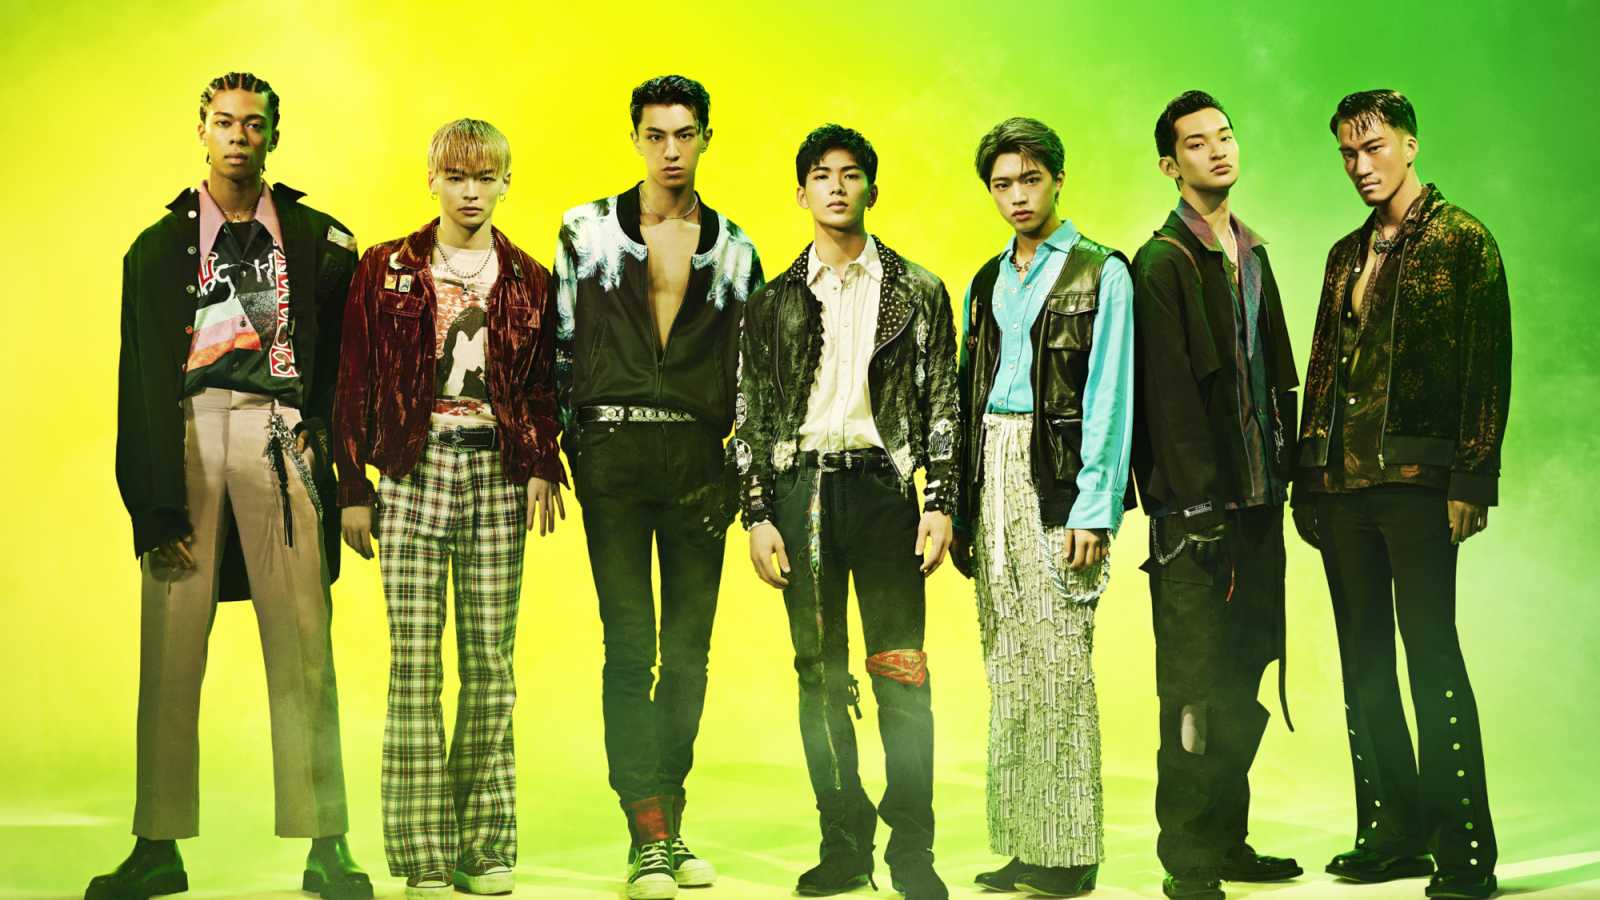 PSYCHIC FEVER from EXILE TRIBE's First Album © PSYCHIC FEVER from EXILE TRIBE. All rights reserved.